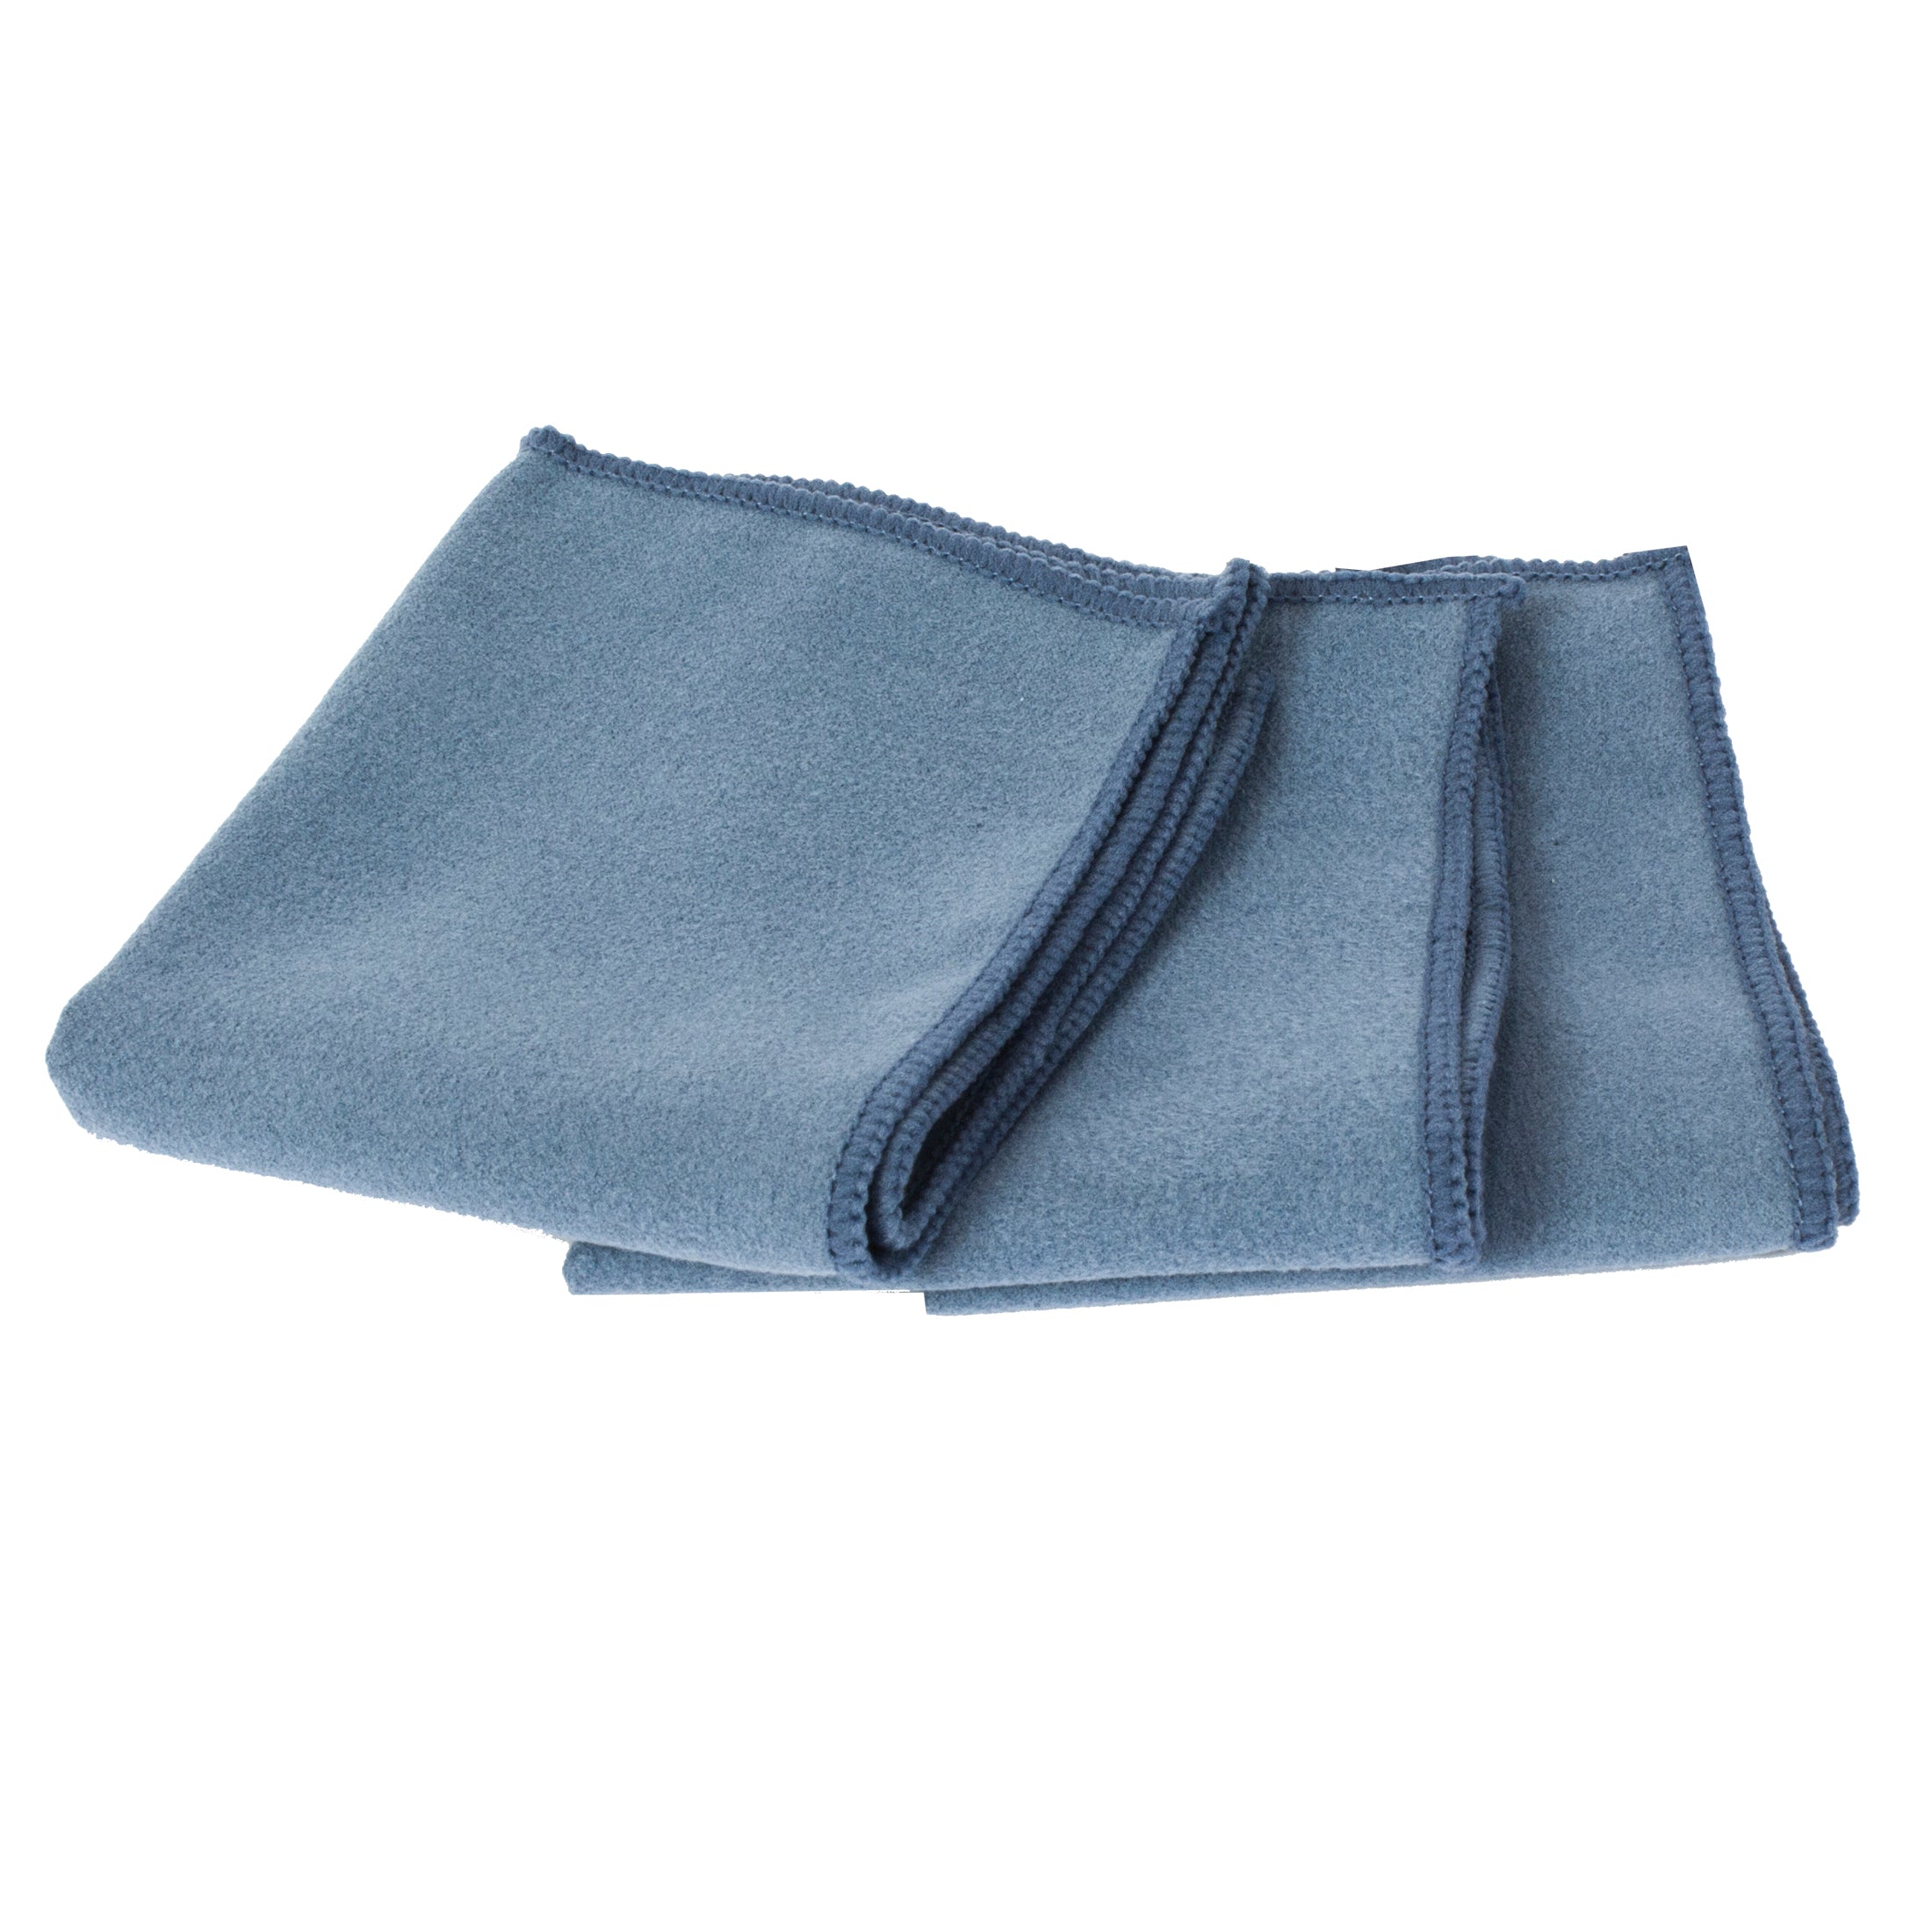 ECP Equine Comfort Products Amazing Microfiber Tack Towels, 3 Pack – Eurow